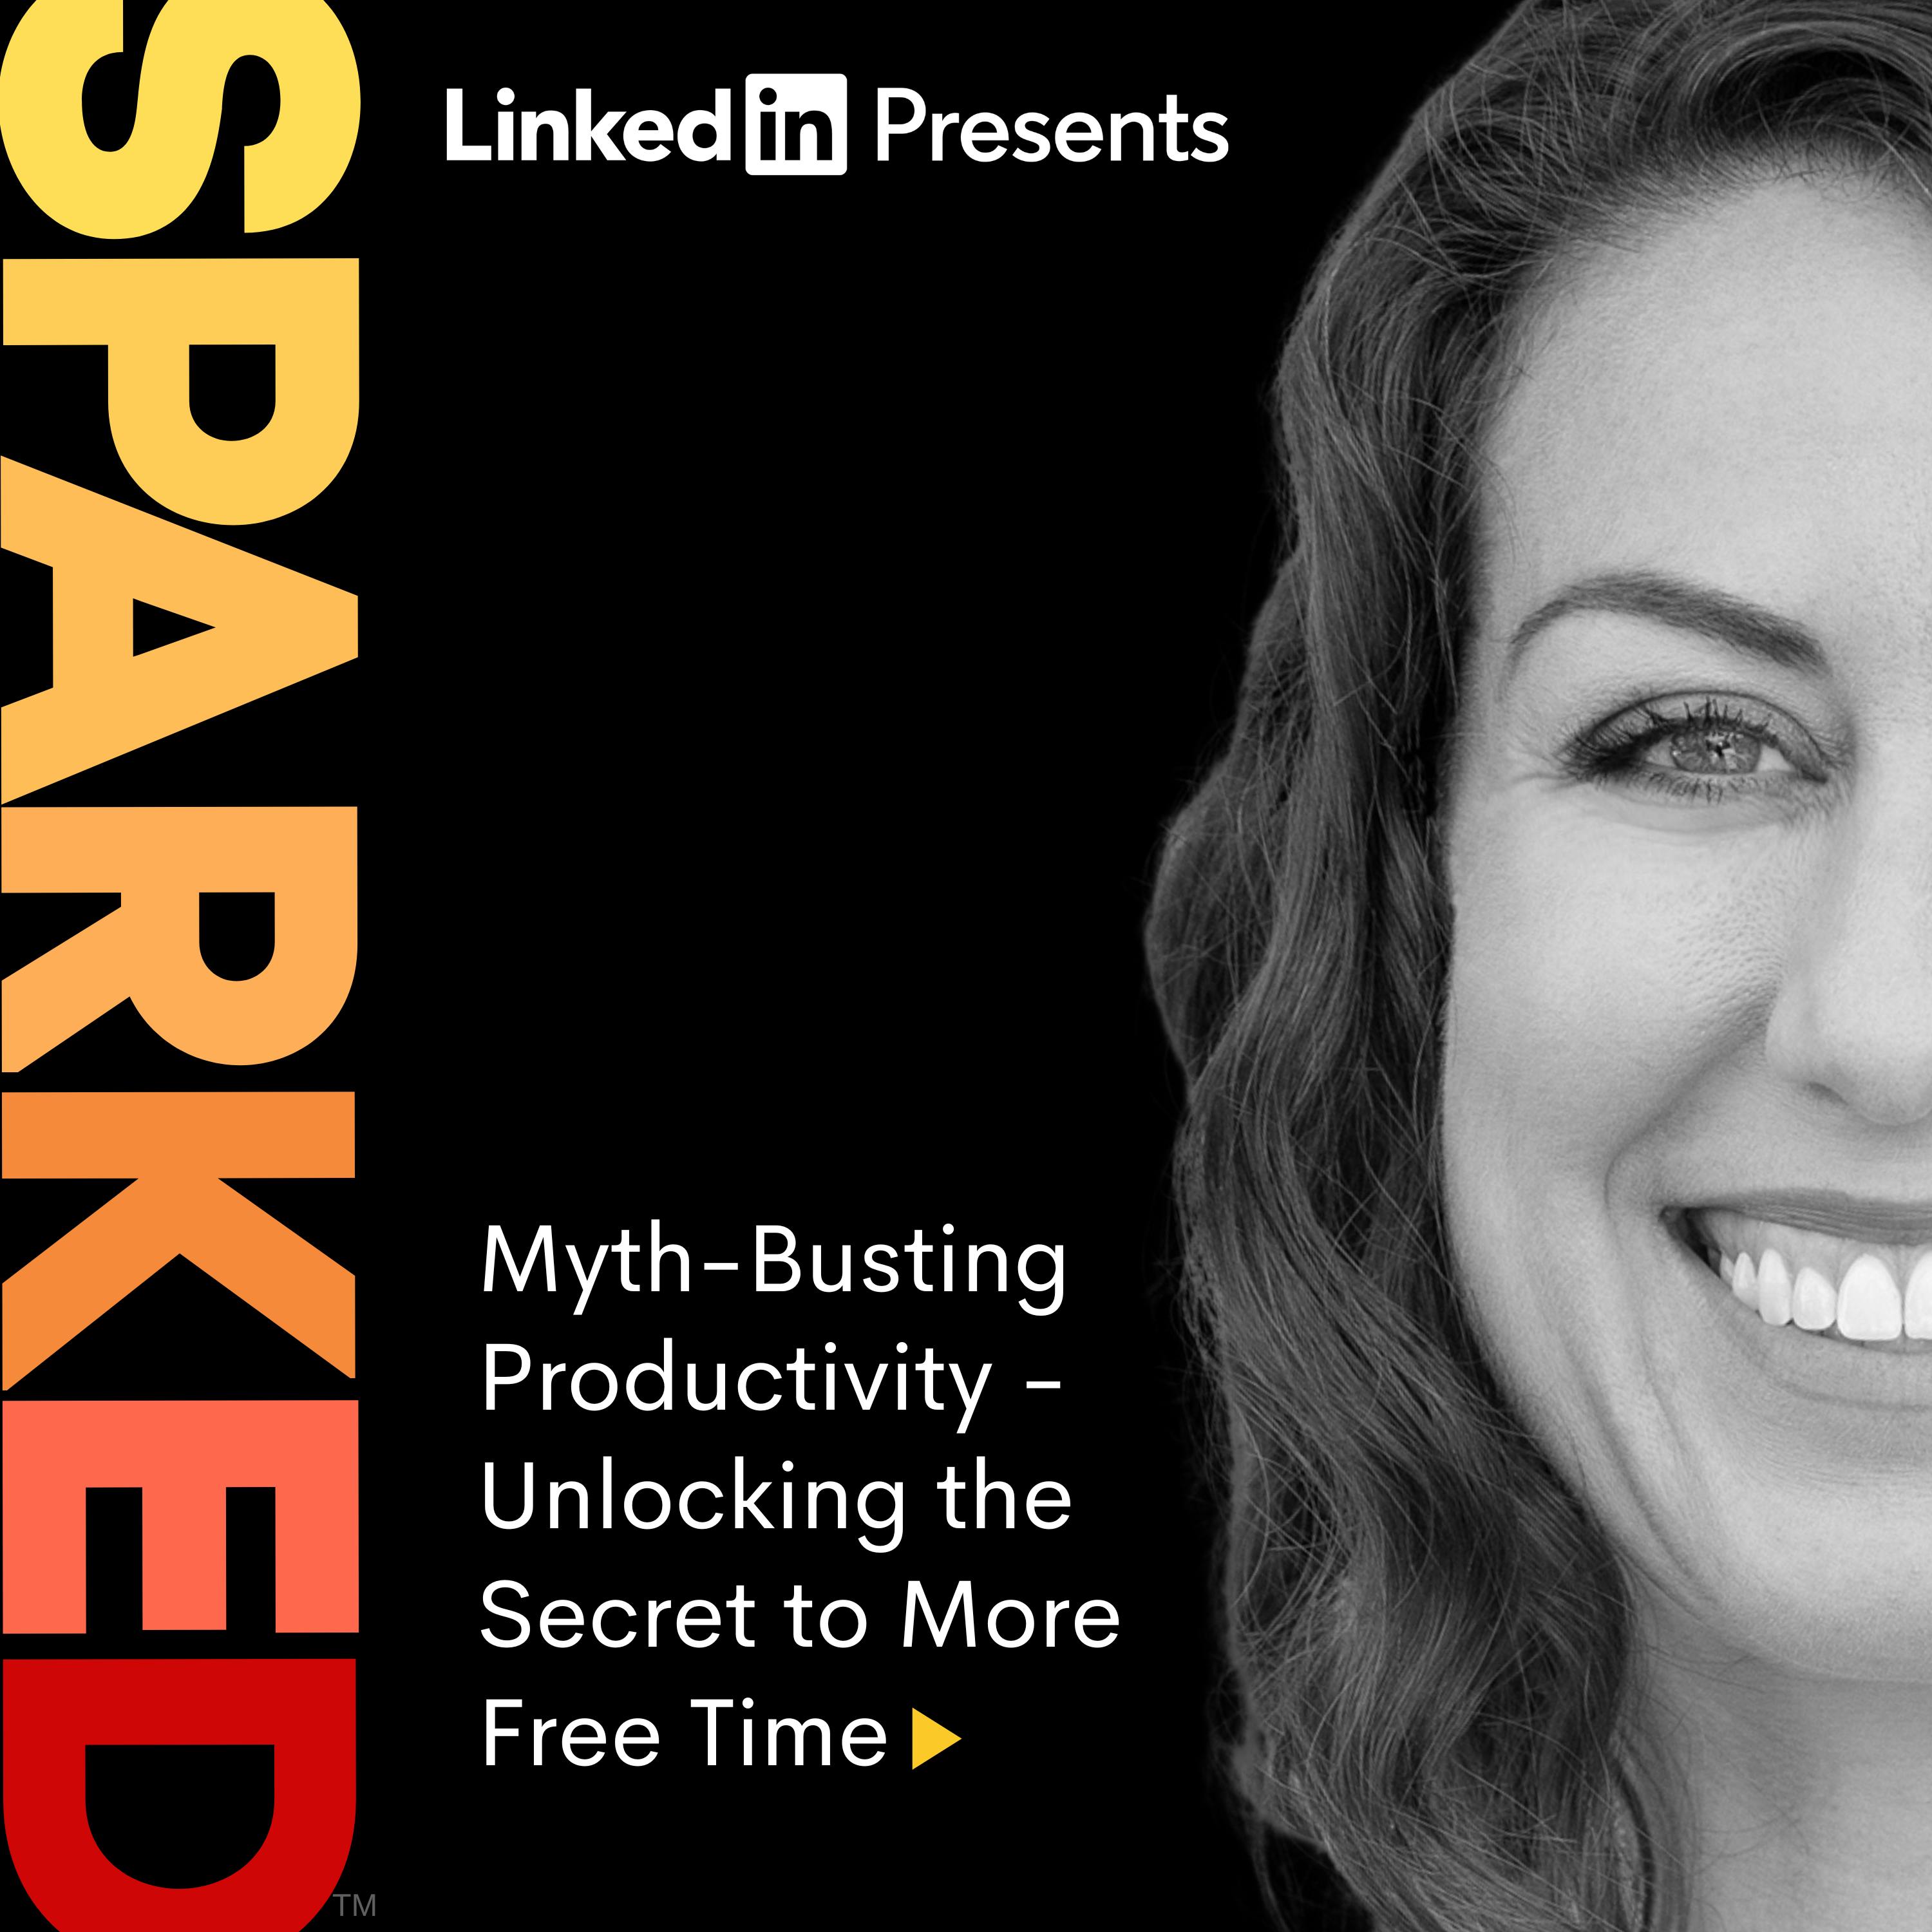 Myth-Busting Productivity | Unlocking the Secret to More Free Time